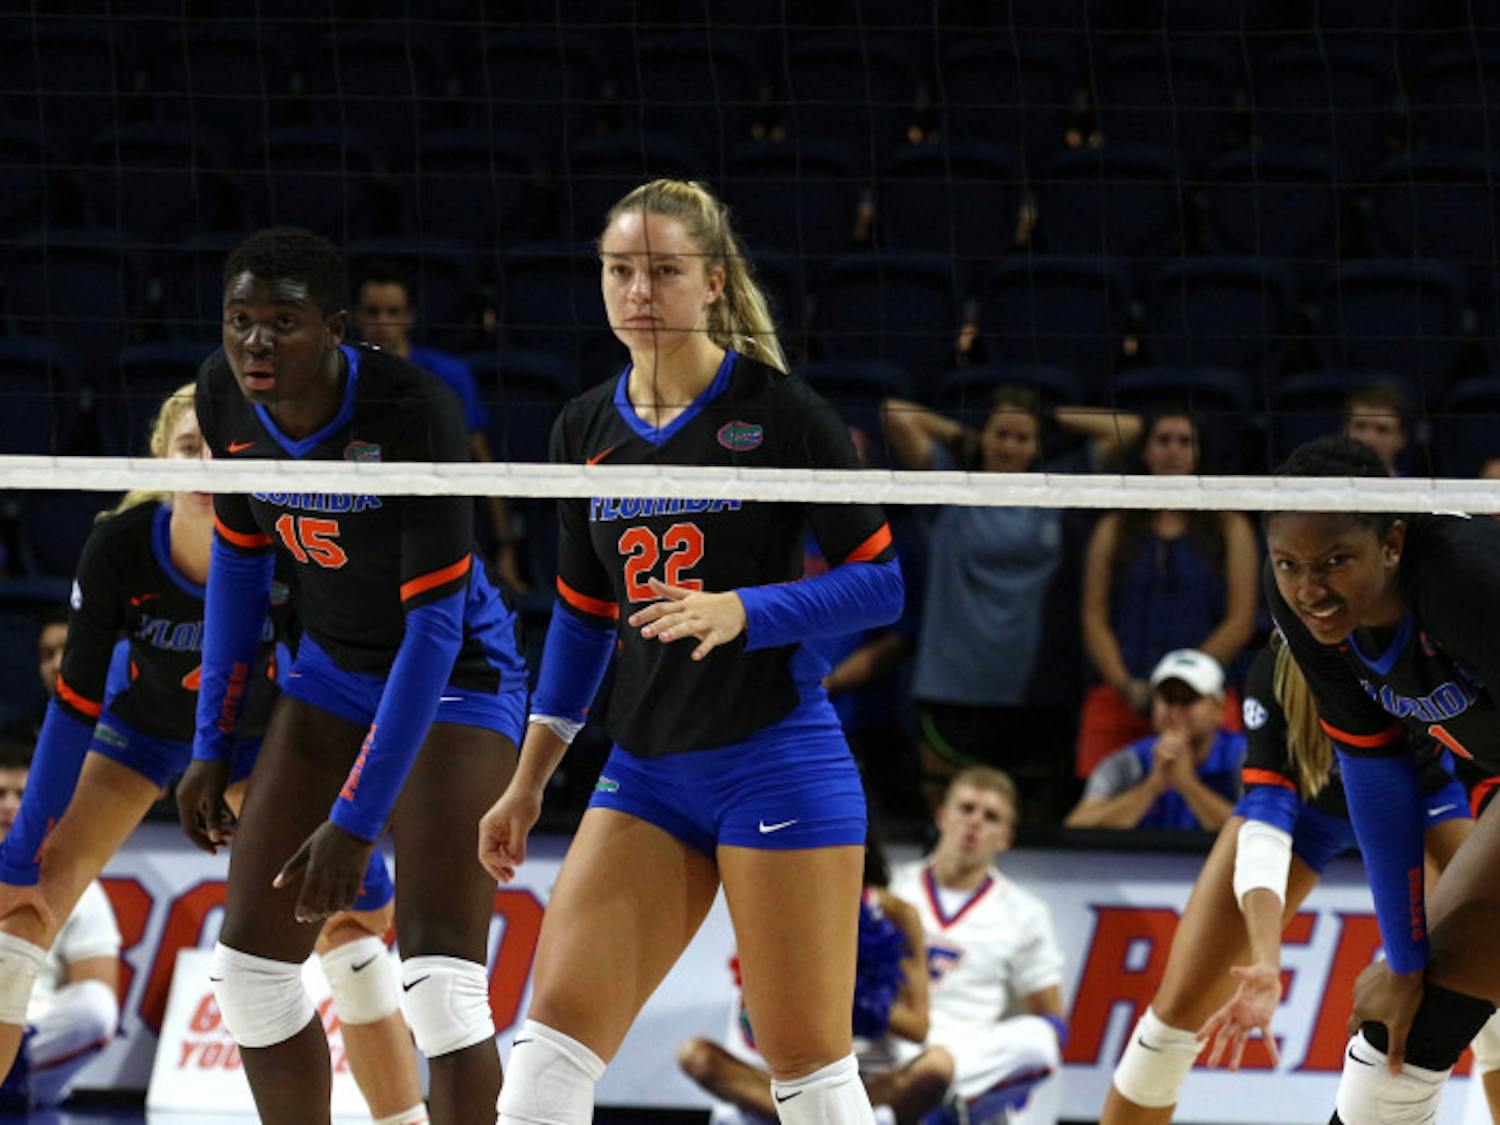 The Gators volleyball team was awarded the No. 2 overall seed in the NCAA Tournament. They will face Alabama State in the first round on Thursday.